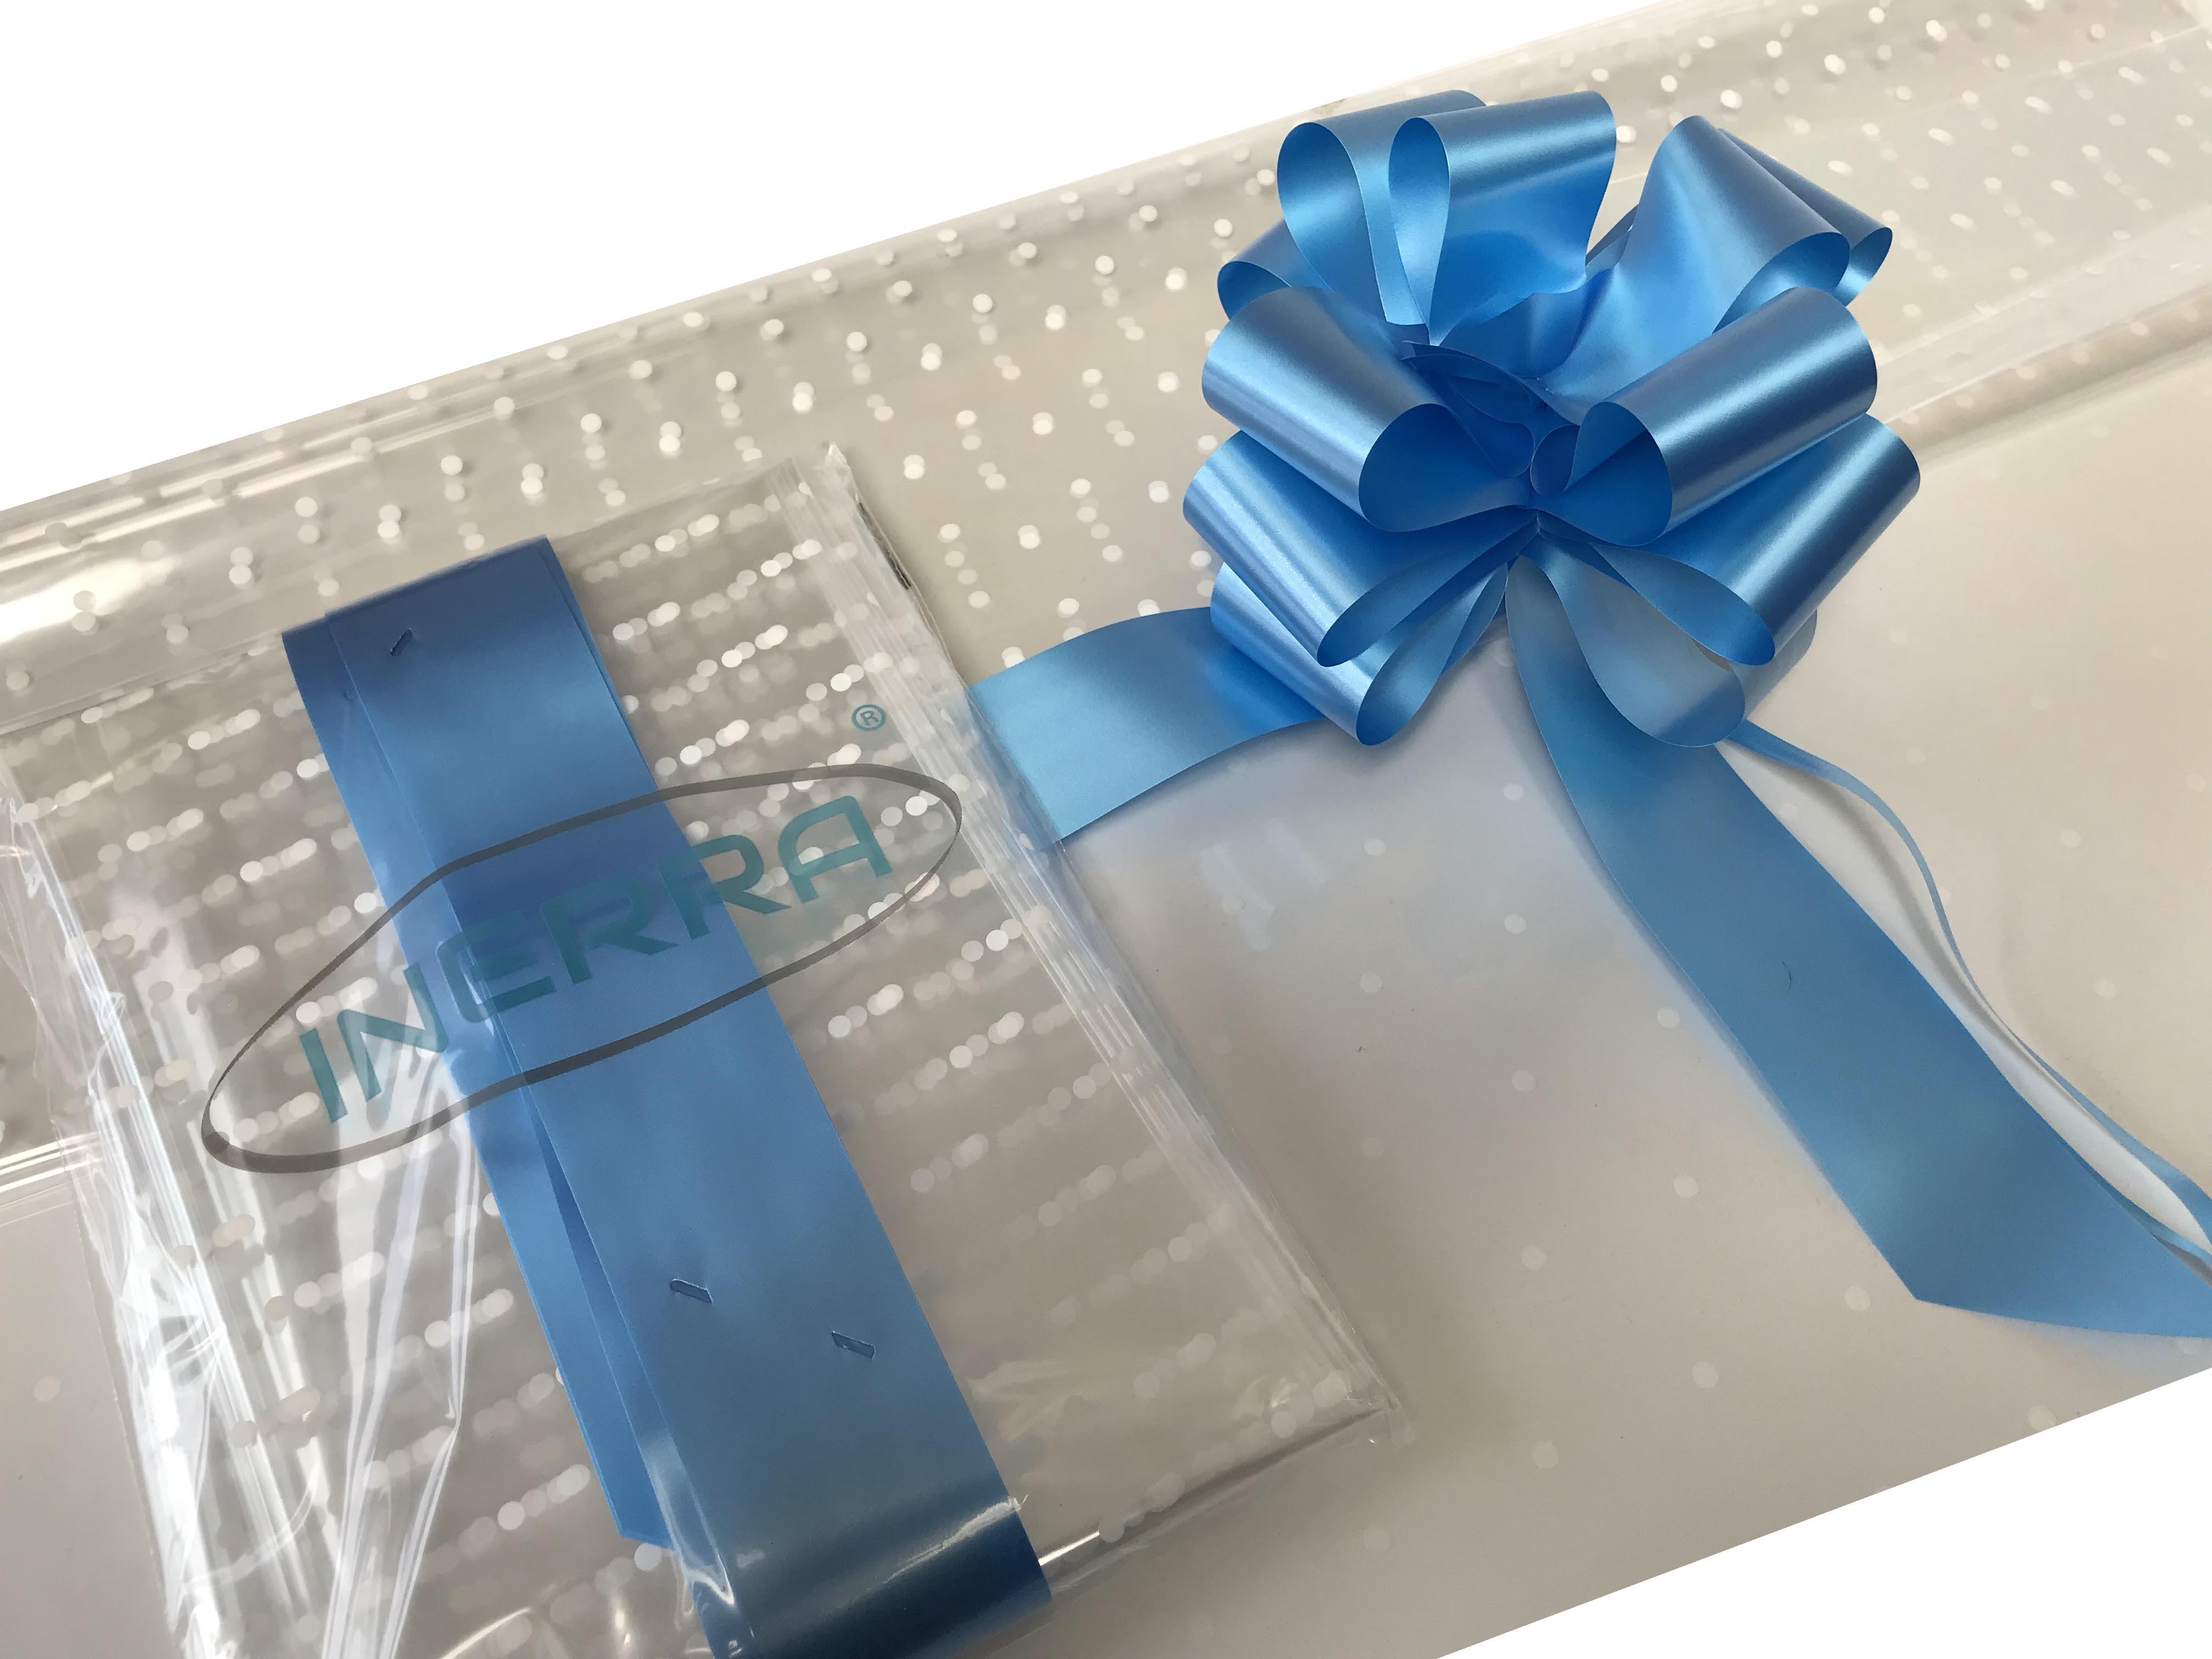 1 OR 2 MTR White Dot Cellophane wrap+FREE curling Ribbon gift-hamper-END OF ROLL 